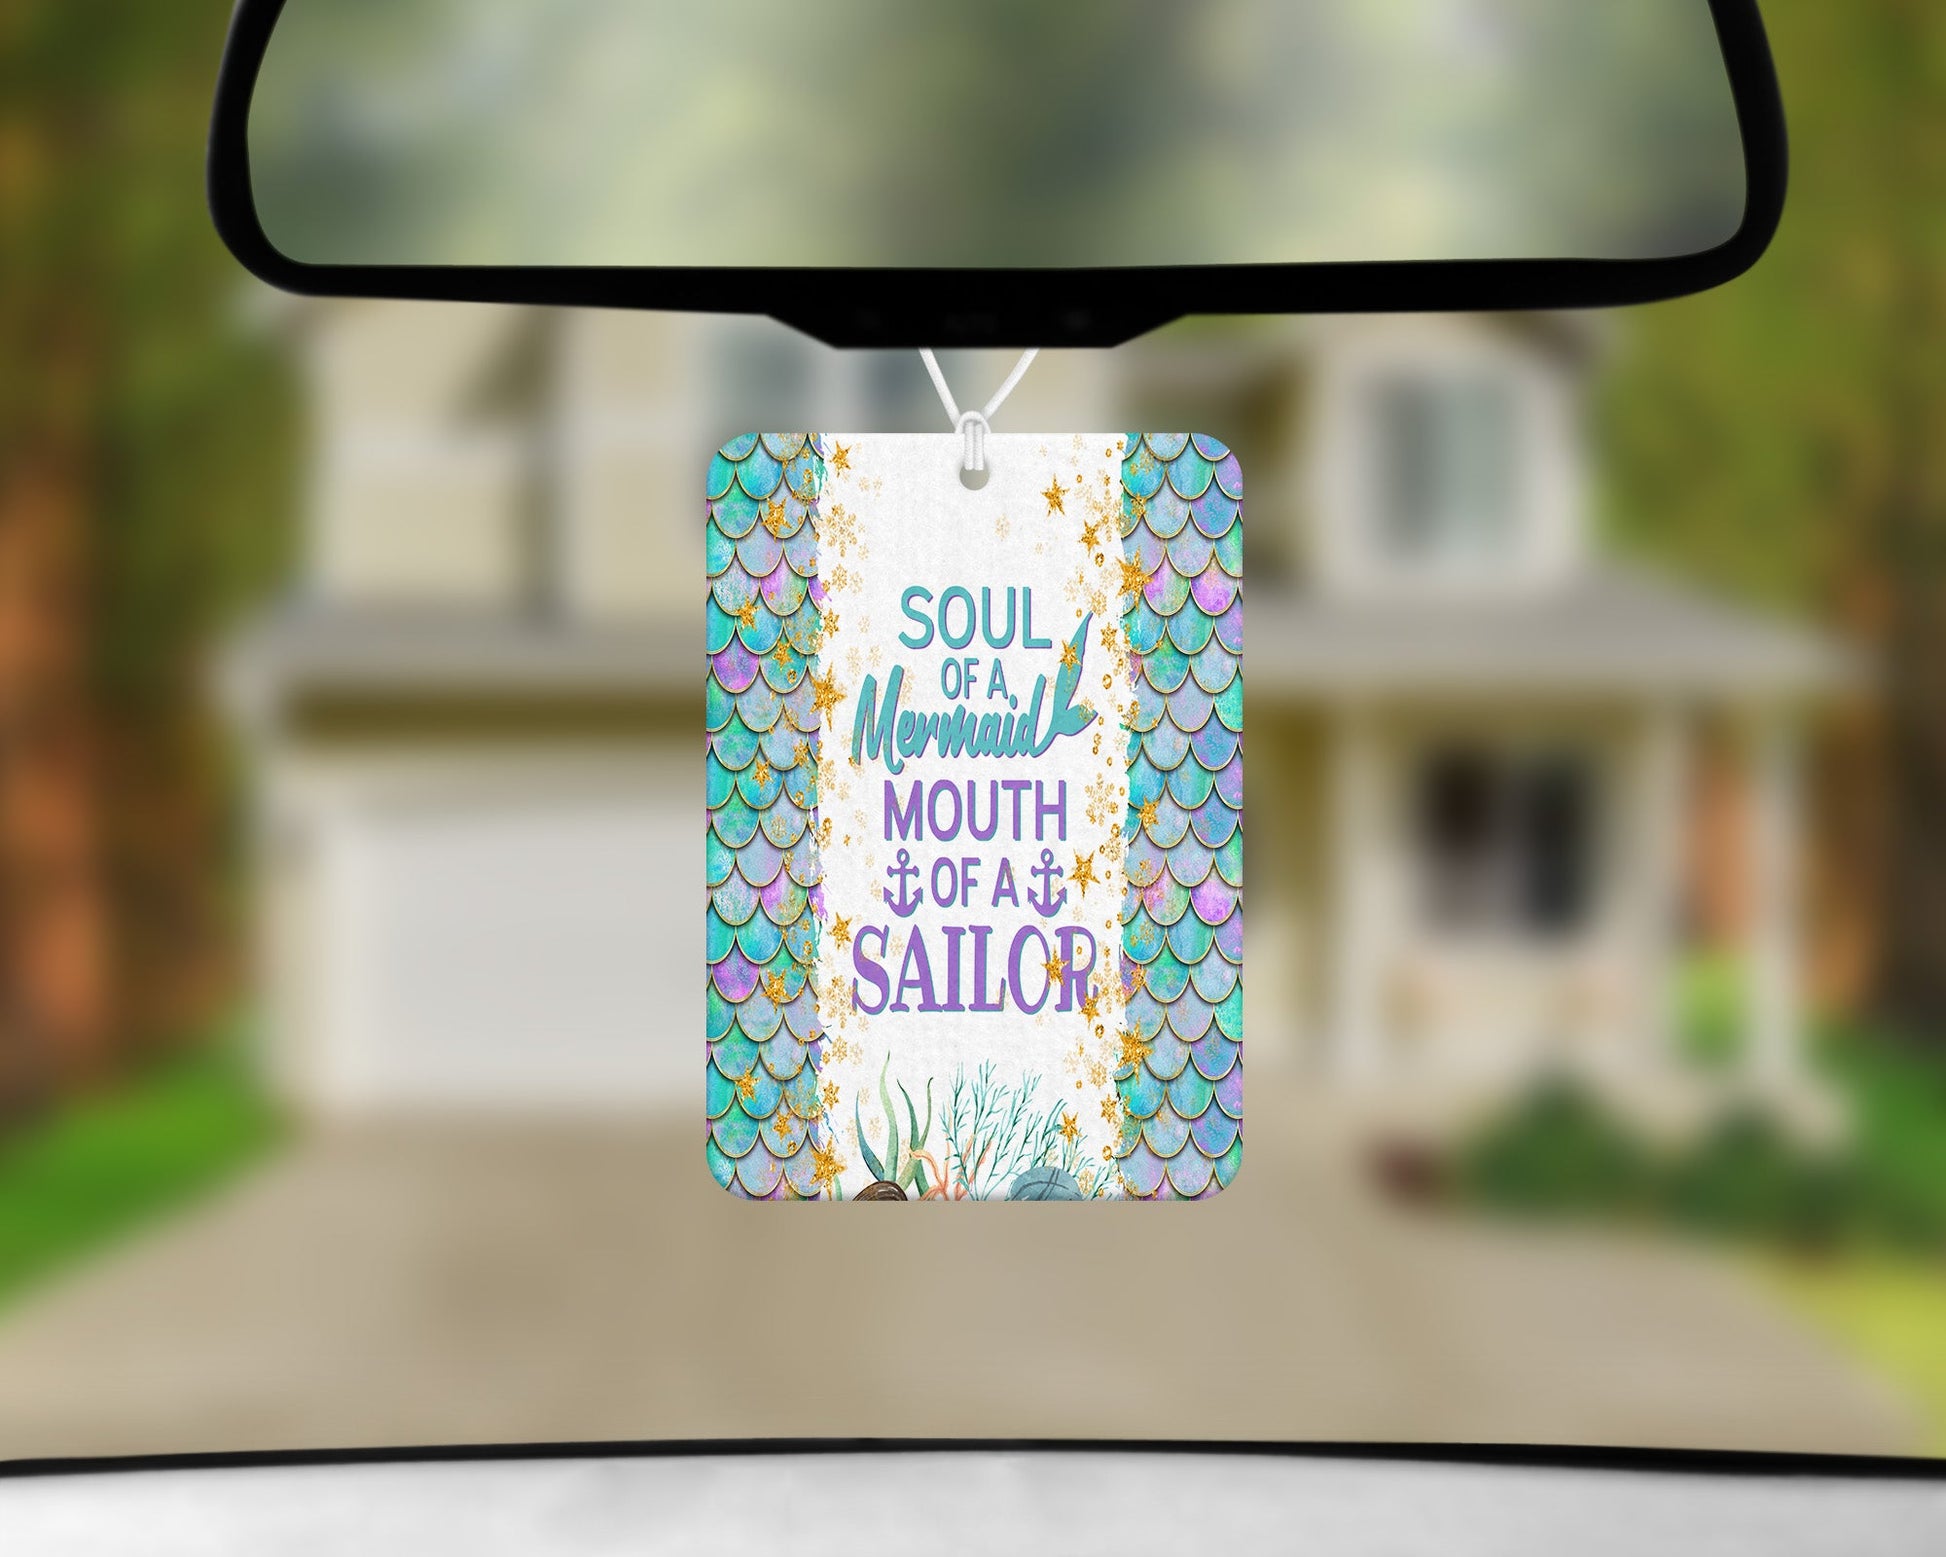 Soul Of A Mermaid Mouth Of A Sailor|Freshie|Includes Scent Bottle - Vehicle Air Freshener